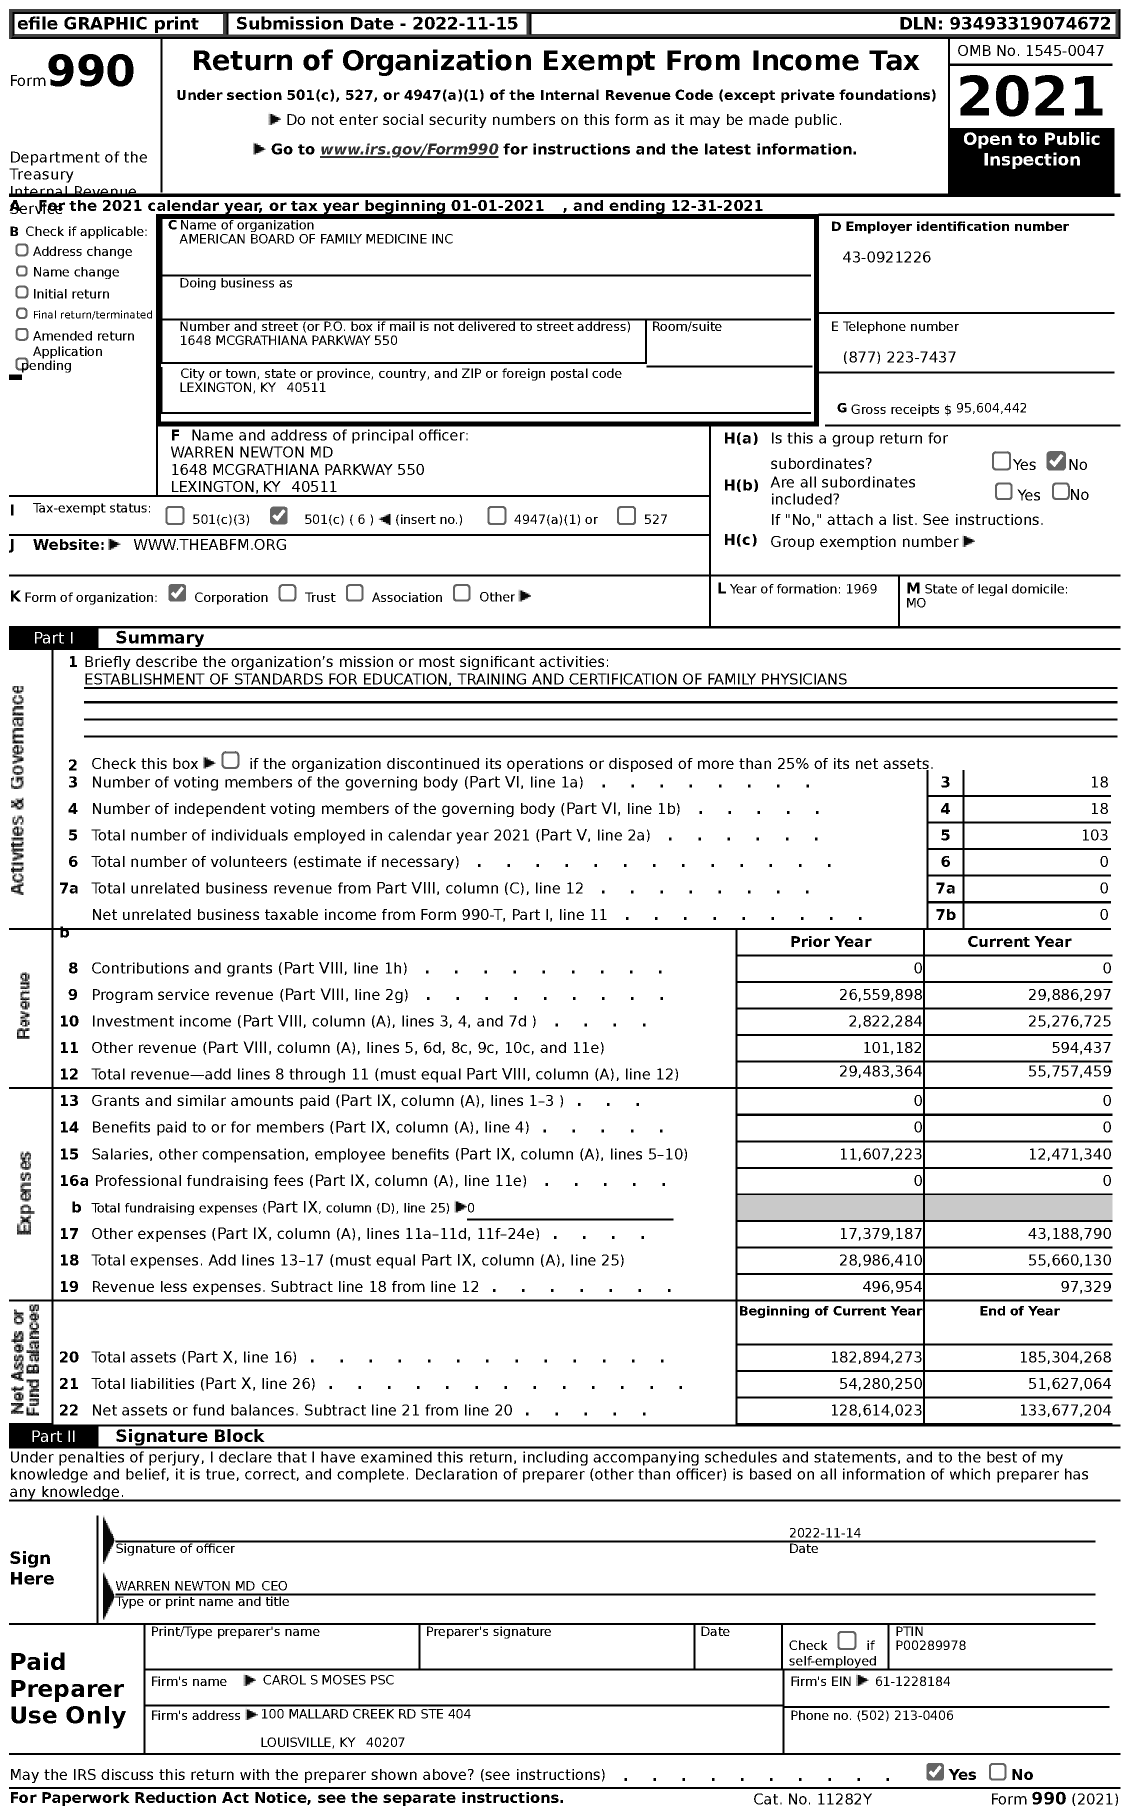 Image of first page of 2021 Form 990 for American Board of Family Medicine (ABFM)